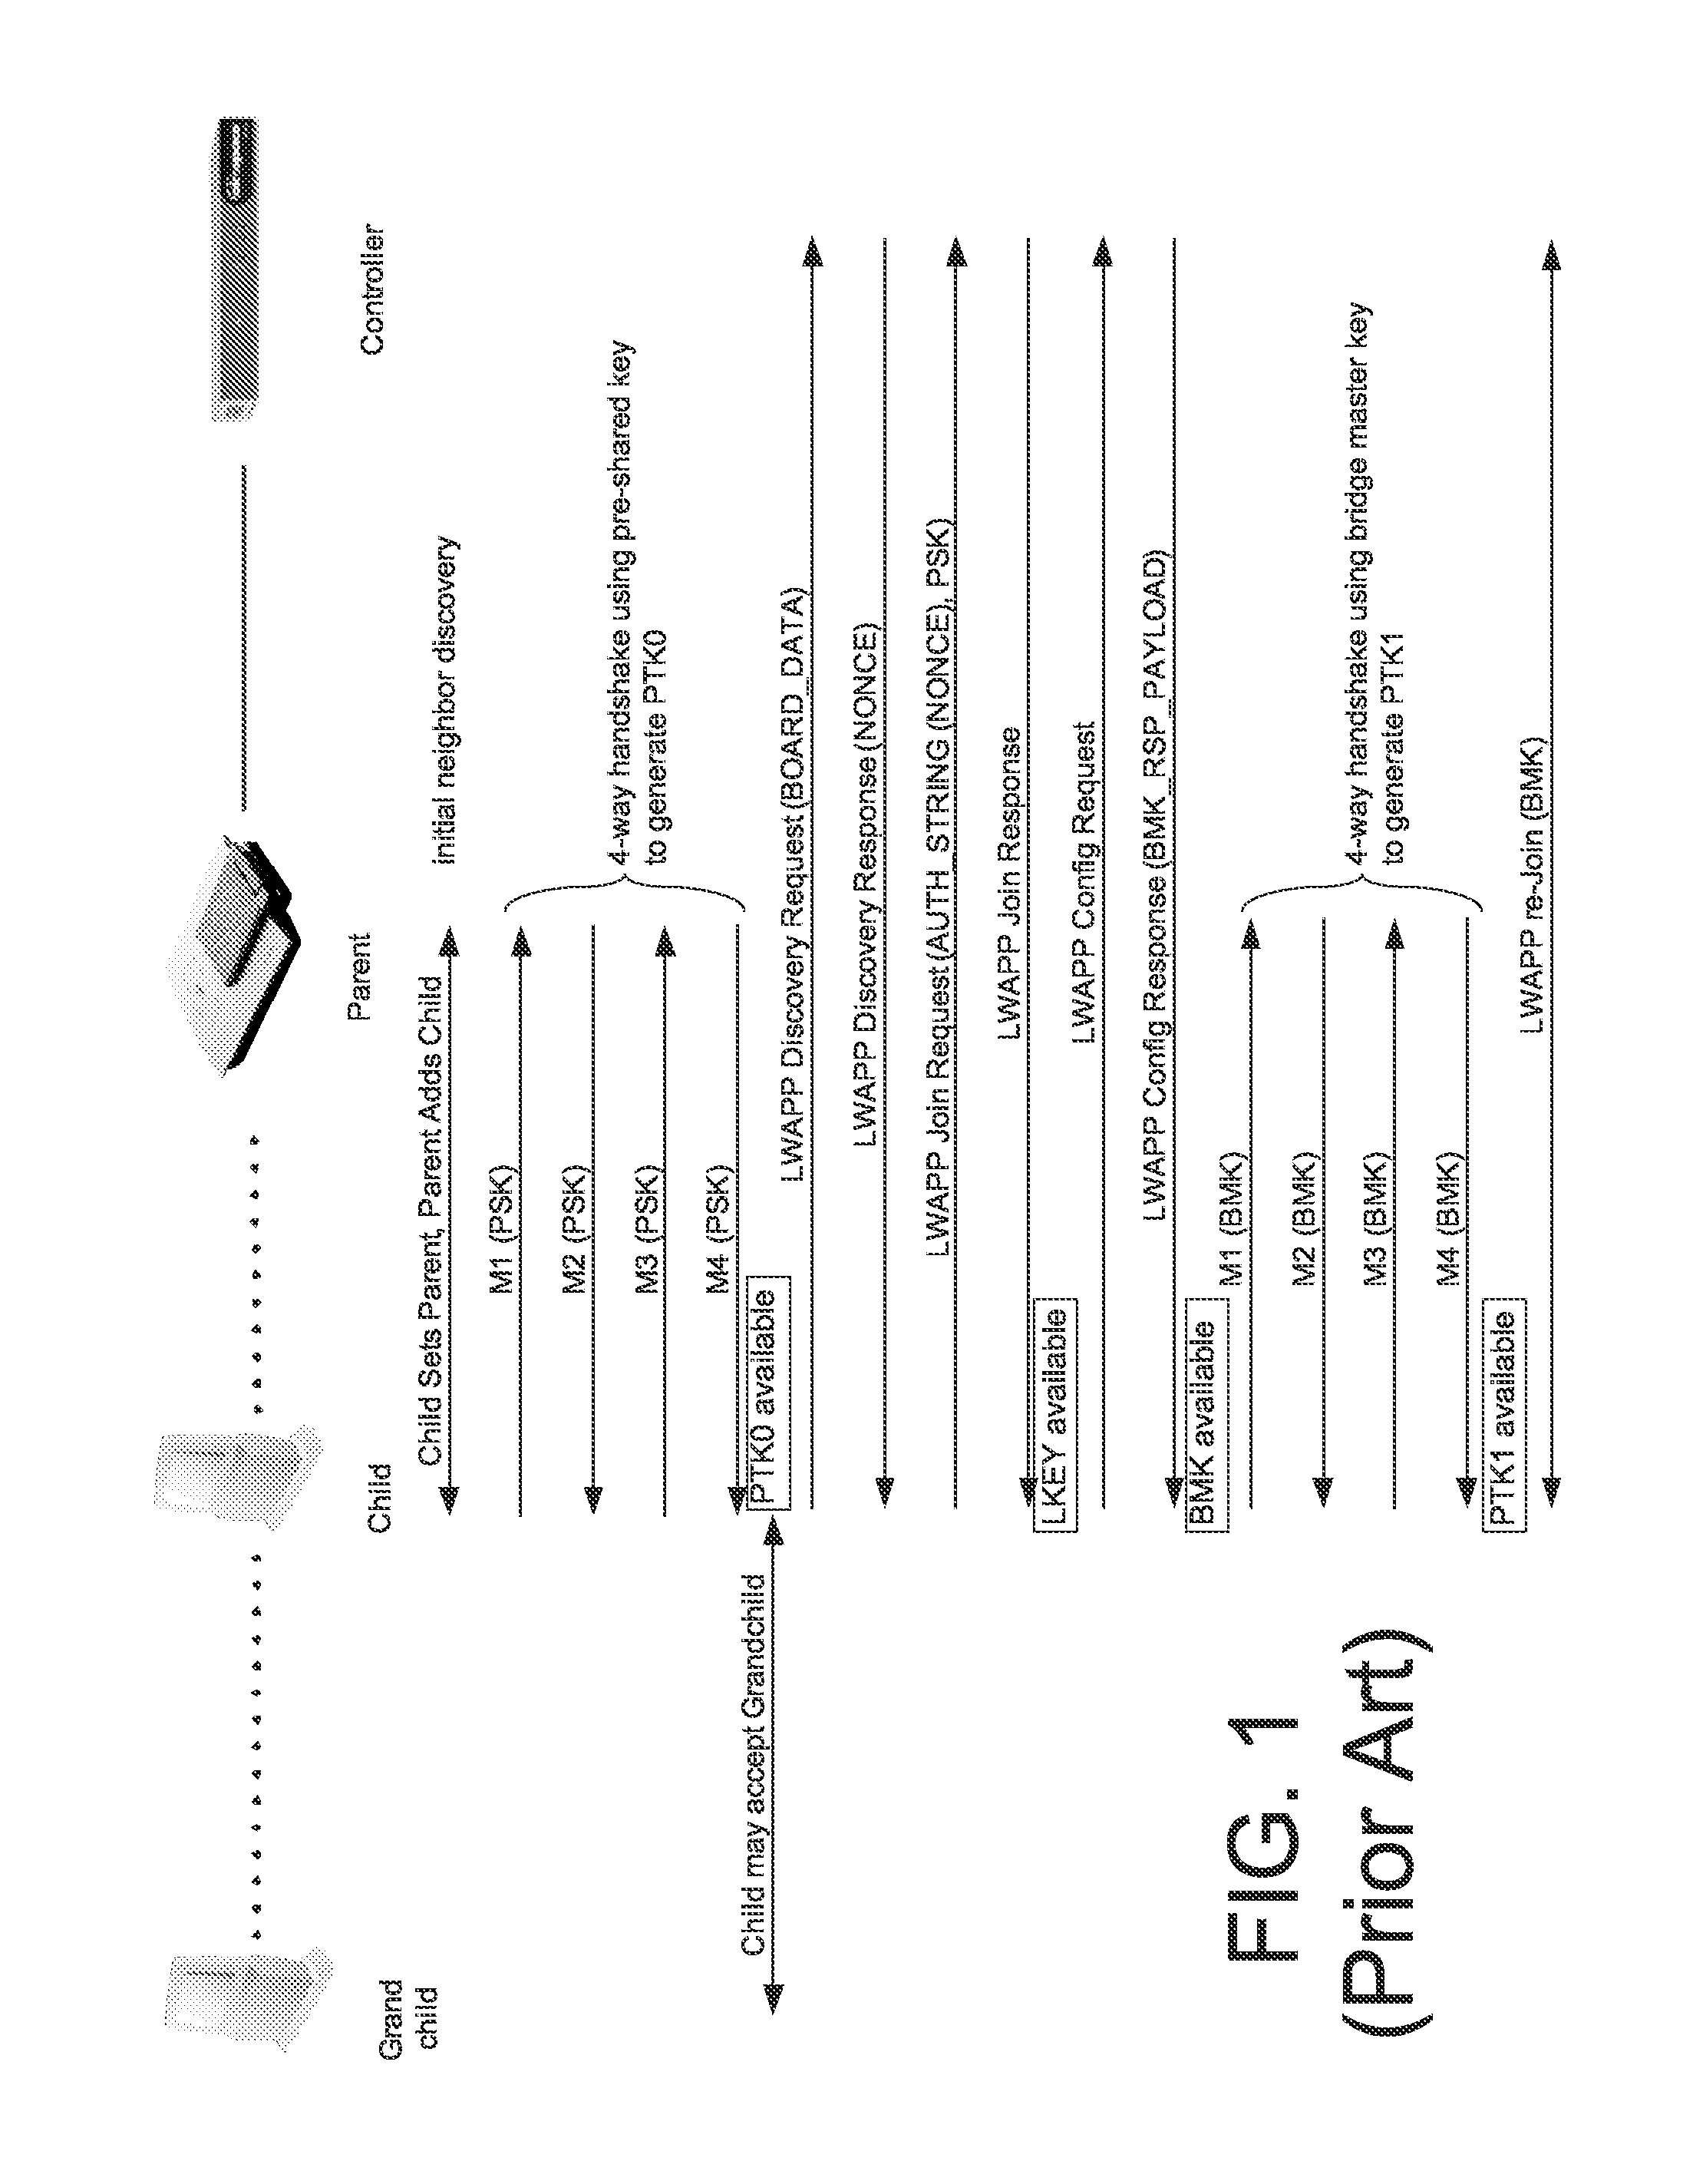 System and method for securing mesh access points in a wireless mesh network, including rapid roaming